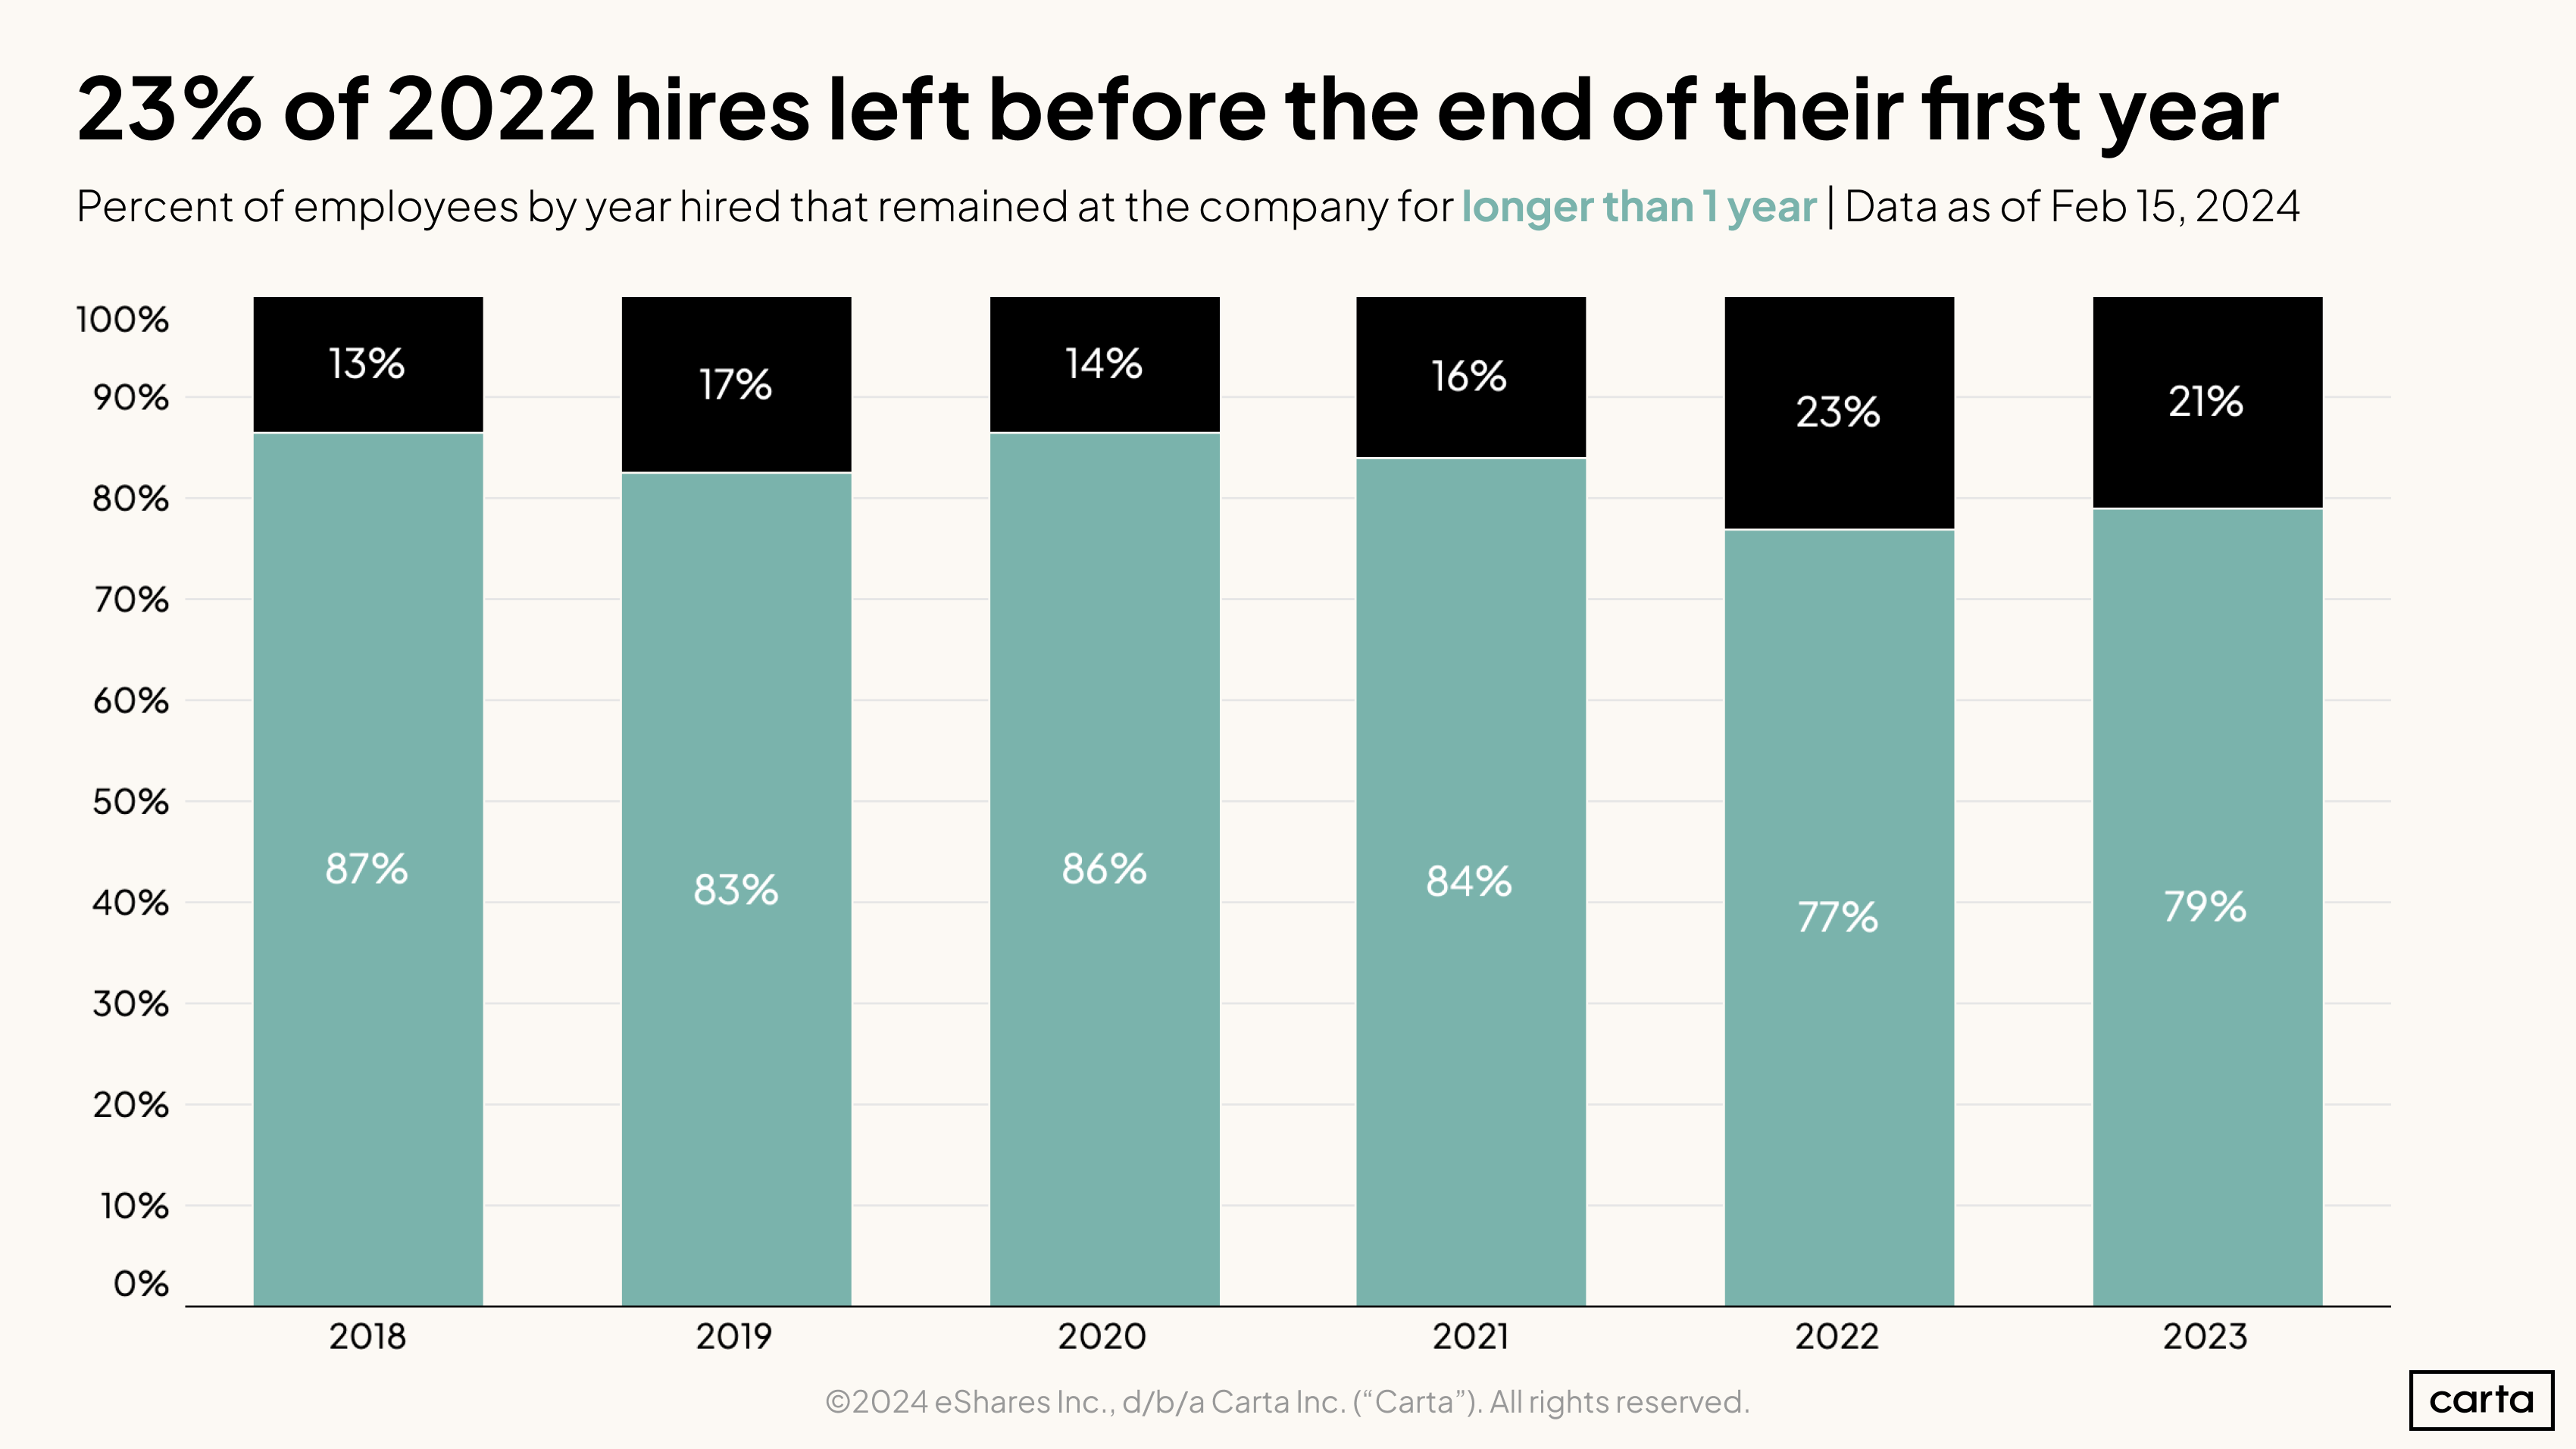 23 percent of 2022 hires left before the end of their first year